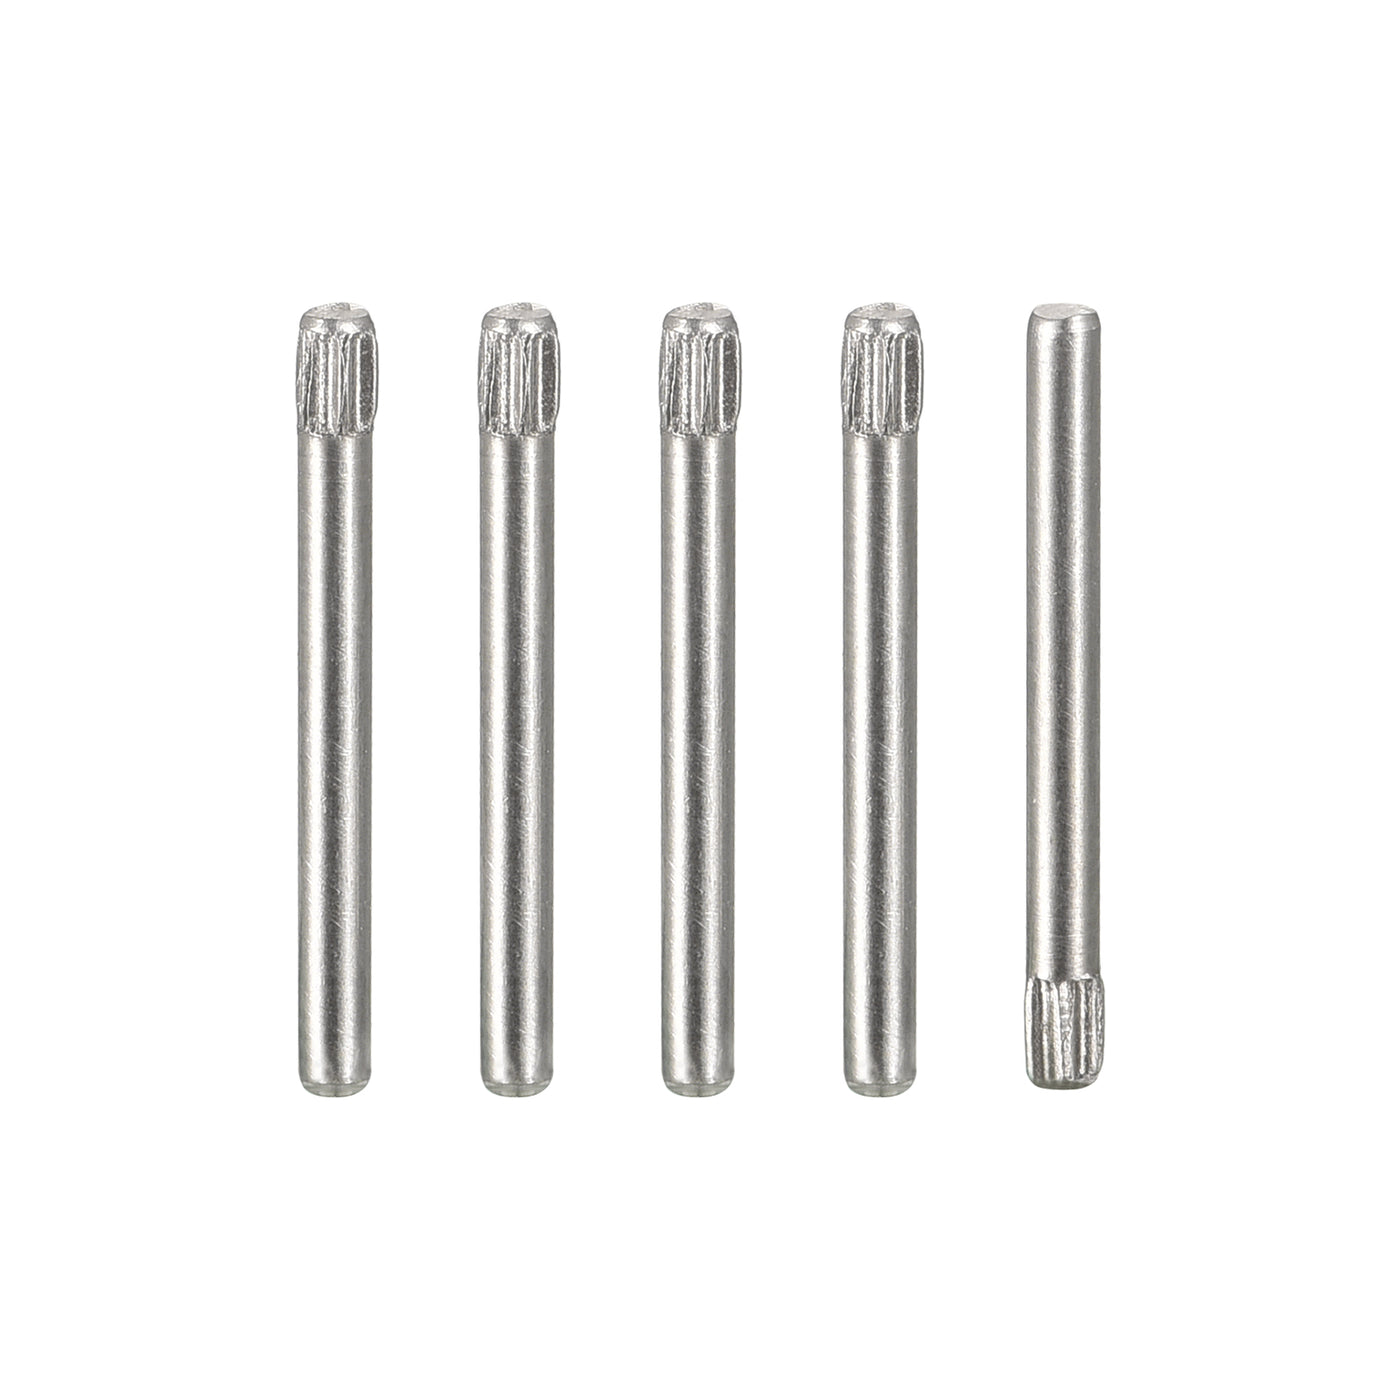 uxcell Uxcell 1.5x16mm 304 Stainless Steel Dowel Pins, 5Pcs Knurled Head Flat End Dowel Pin